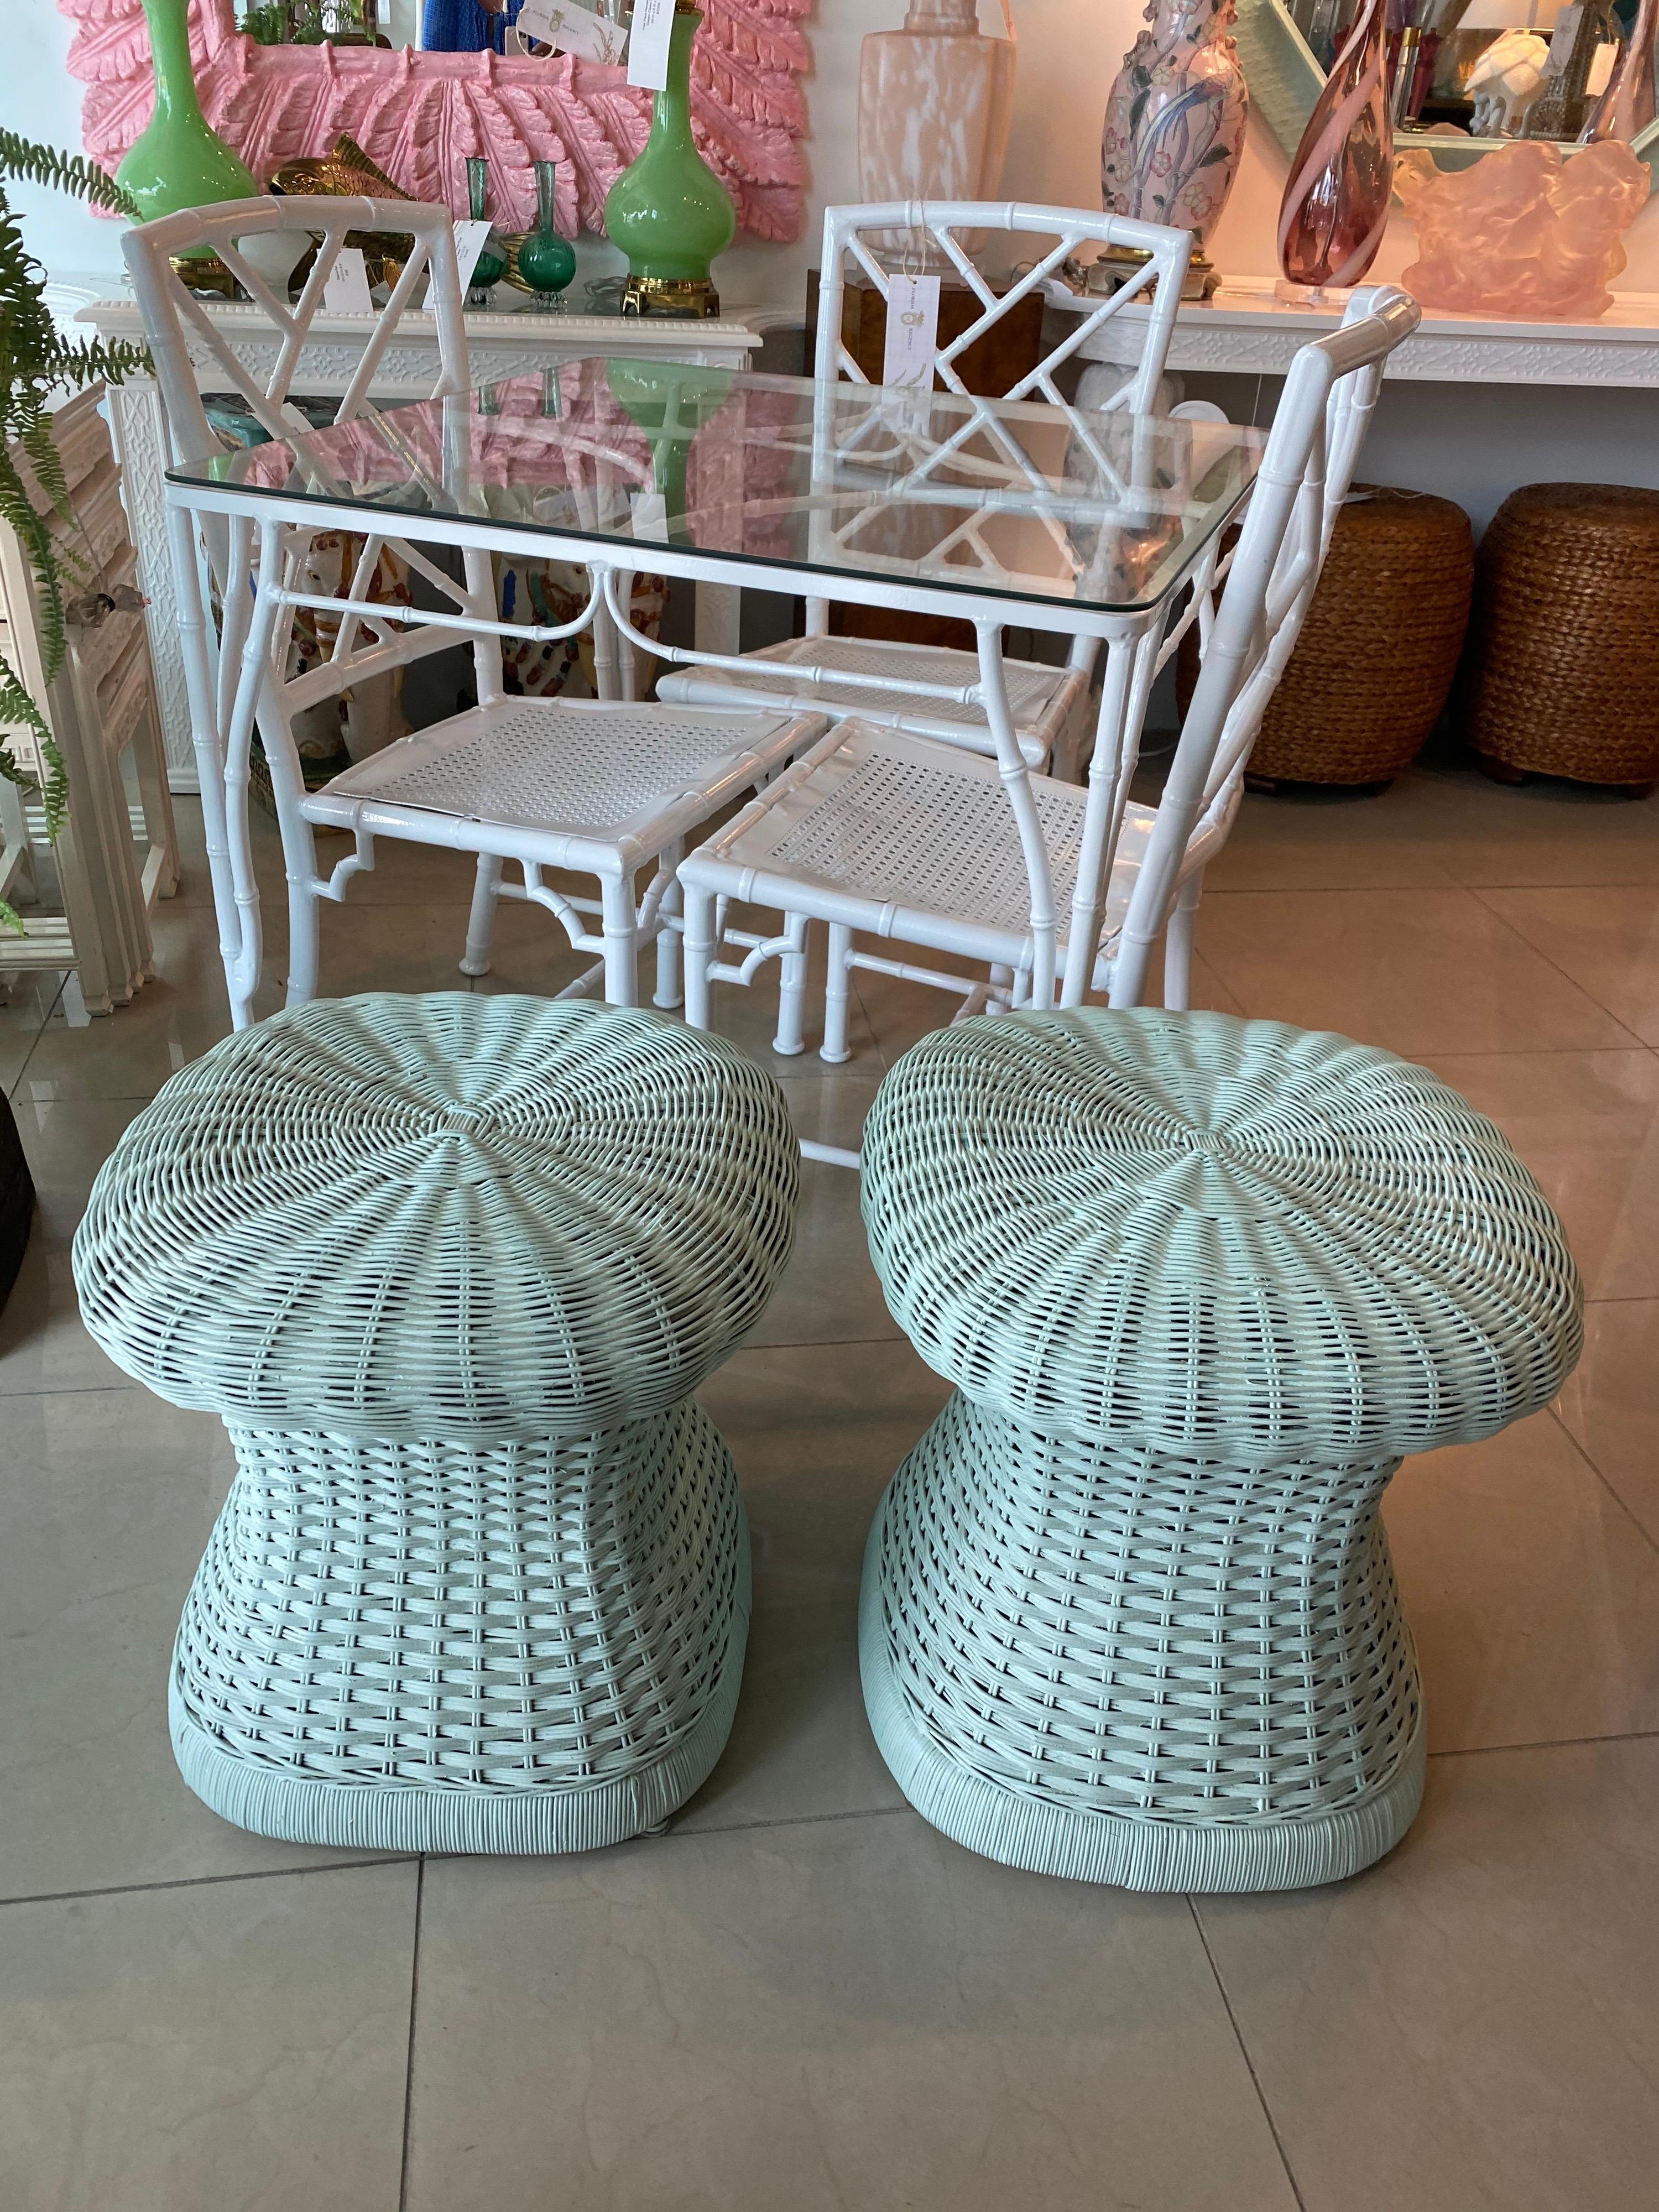 Lovely pair of vintage wicker, mushroom shape, stools benches. Original light mint green paint. No missing or broken wicker pieces. Can be painted or lacquered a different color for an additional charge.